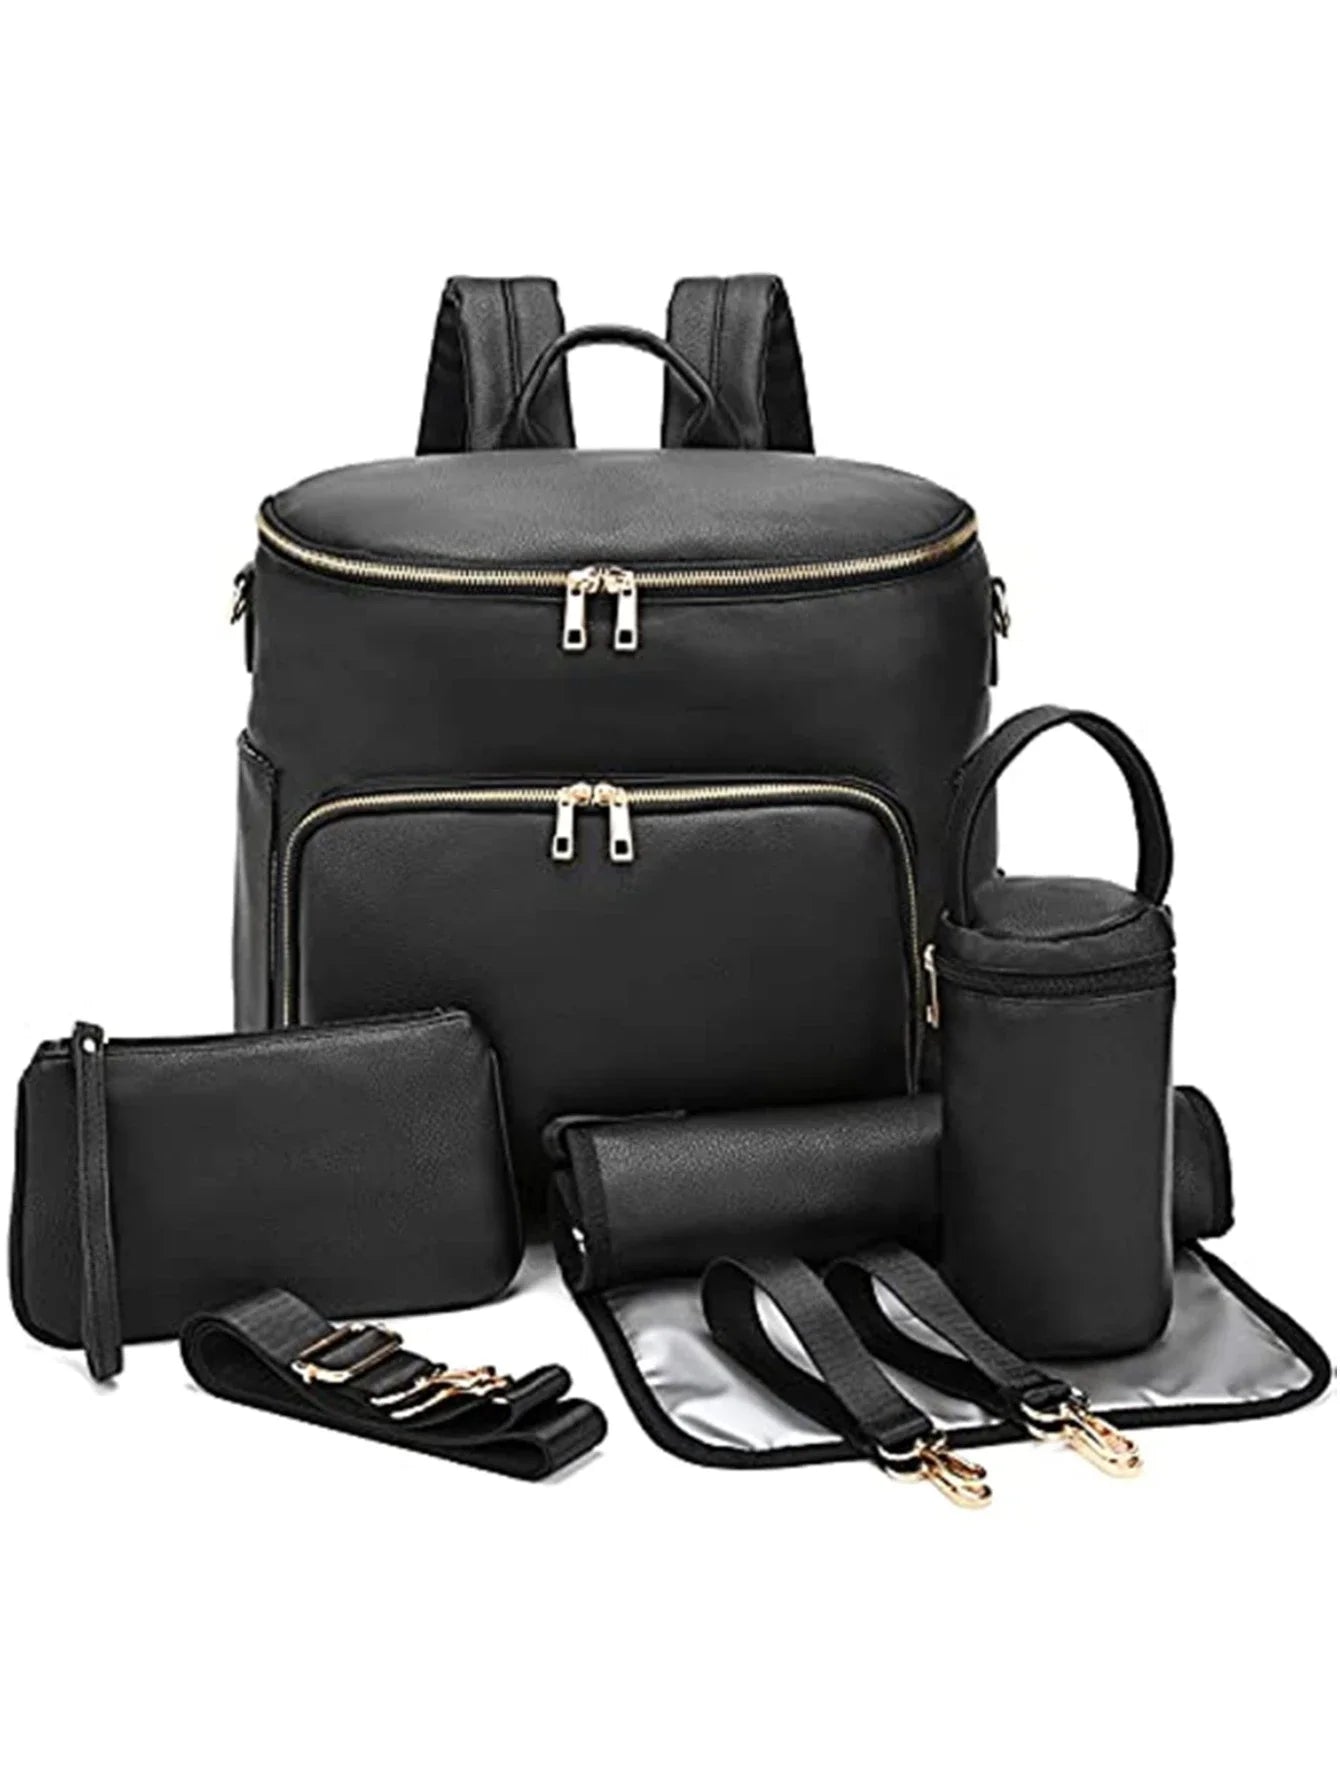 LuxMom™ 7-in-1 PU Leather Diaper Bag - Stylish and spacious large capacity maternity backpack.